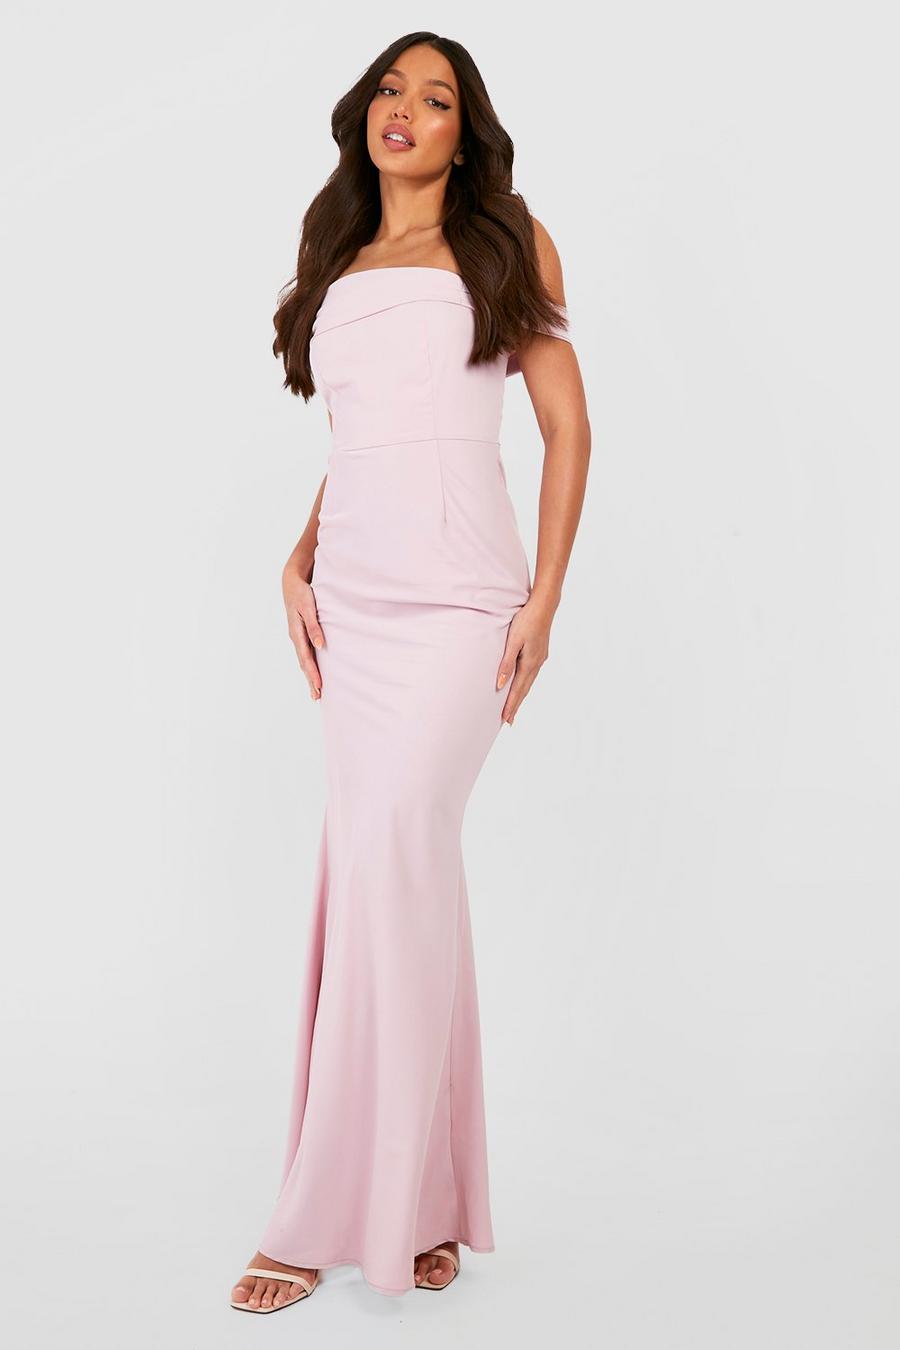 Blush Tall Bridesmaid Off The Shoulder Maxi Dress image number 1